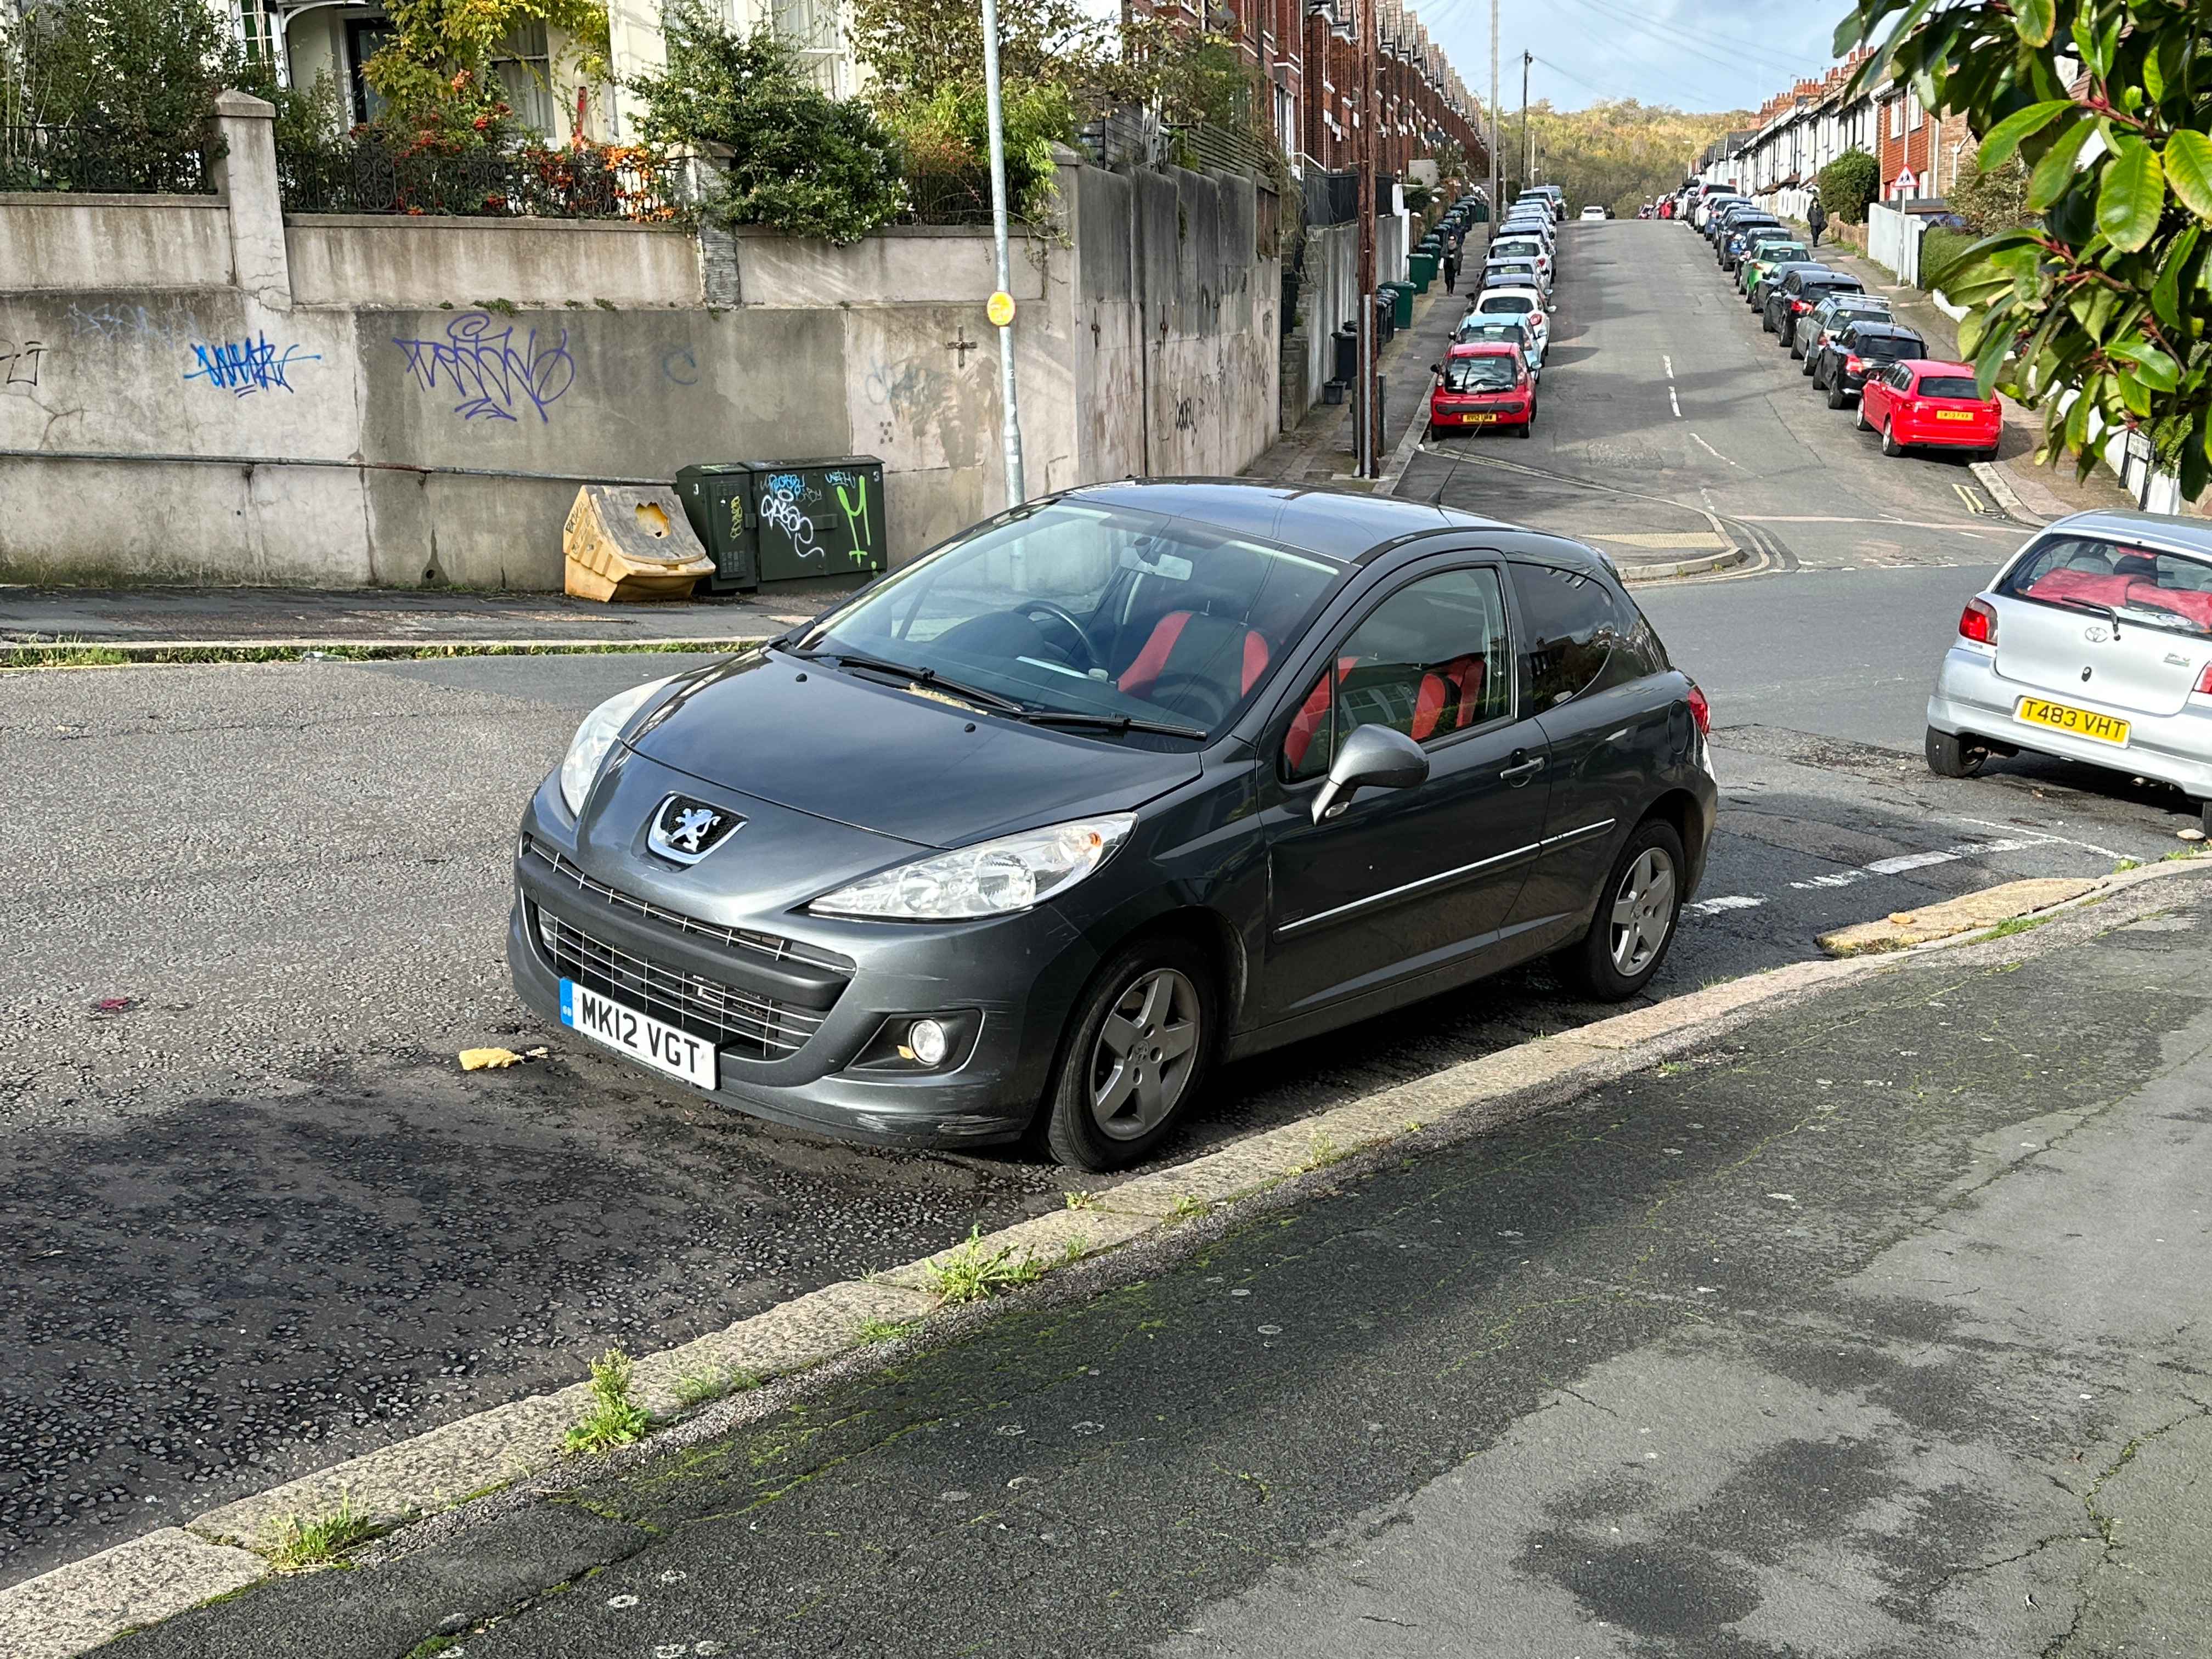 Photograph of MK12 VGT - a Grey Peugeot 207 parked in Hollingdean by a non-resident who uses the local area as part of their Brighton commute. The second of six photographs supplied by the residents of Hollingdean.